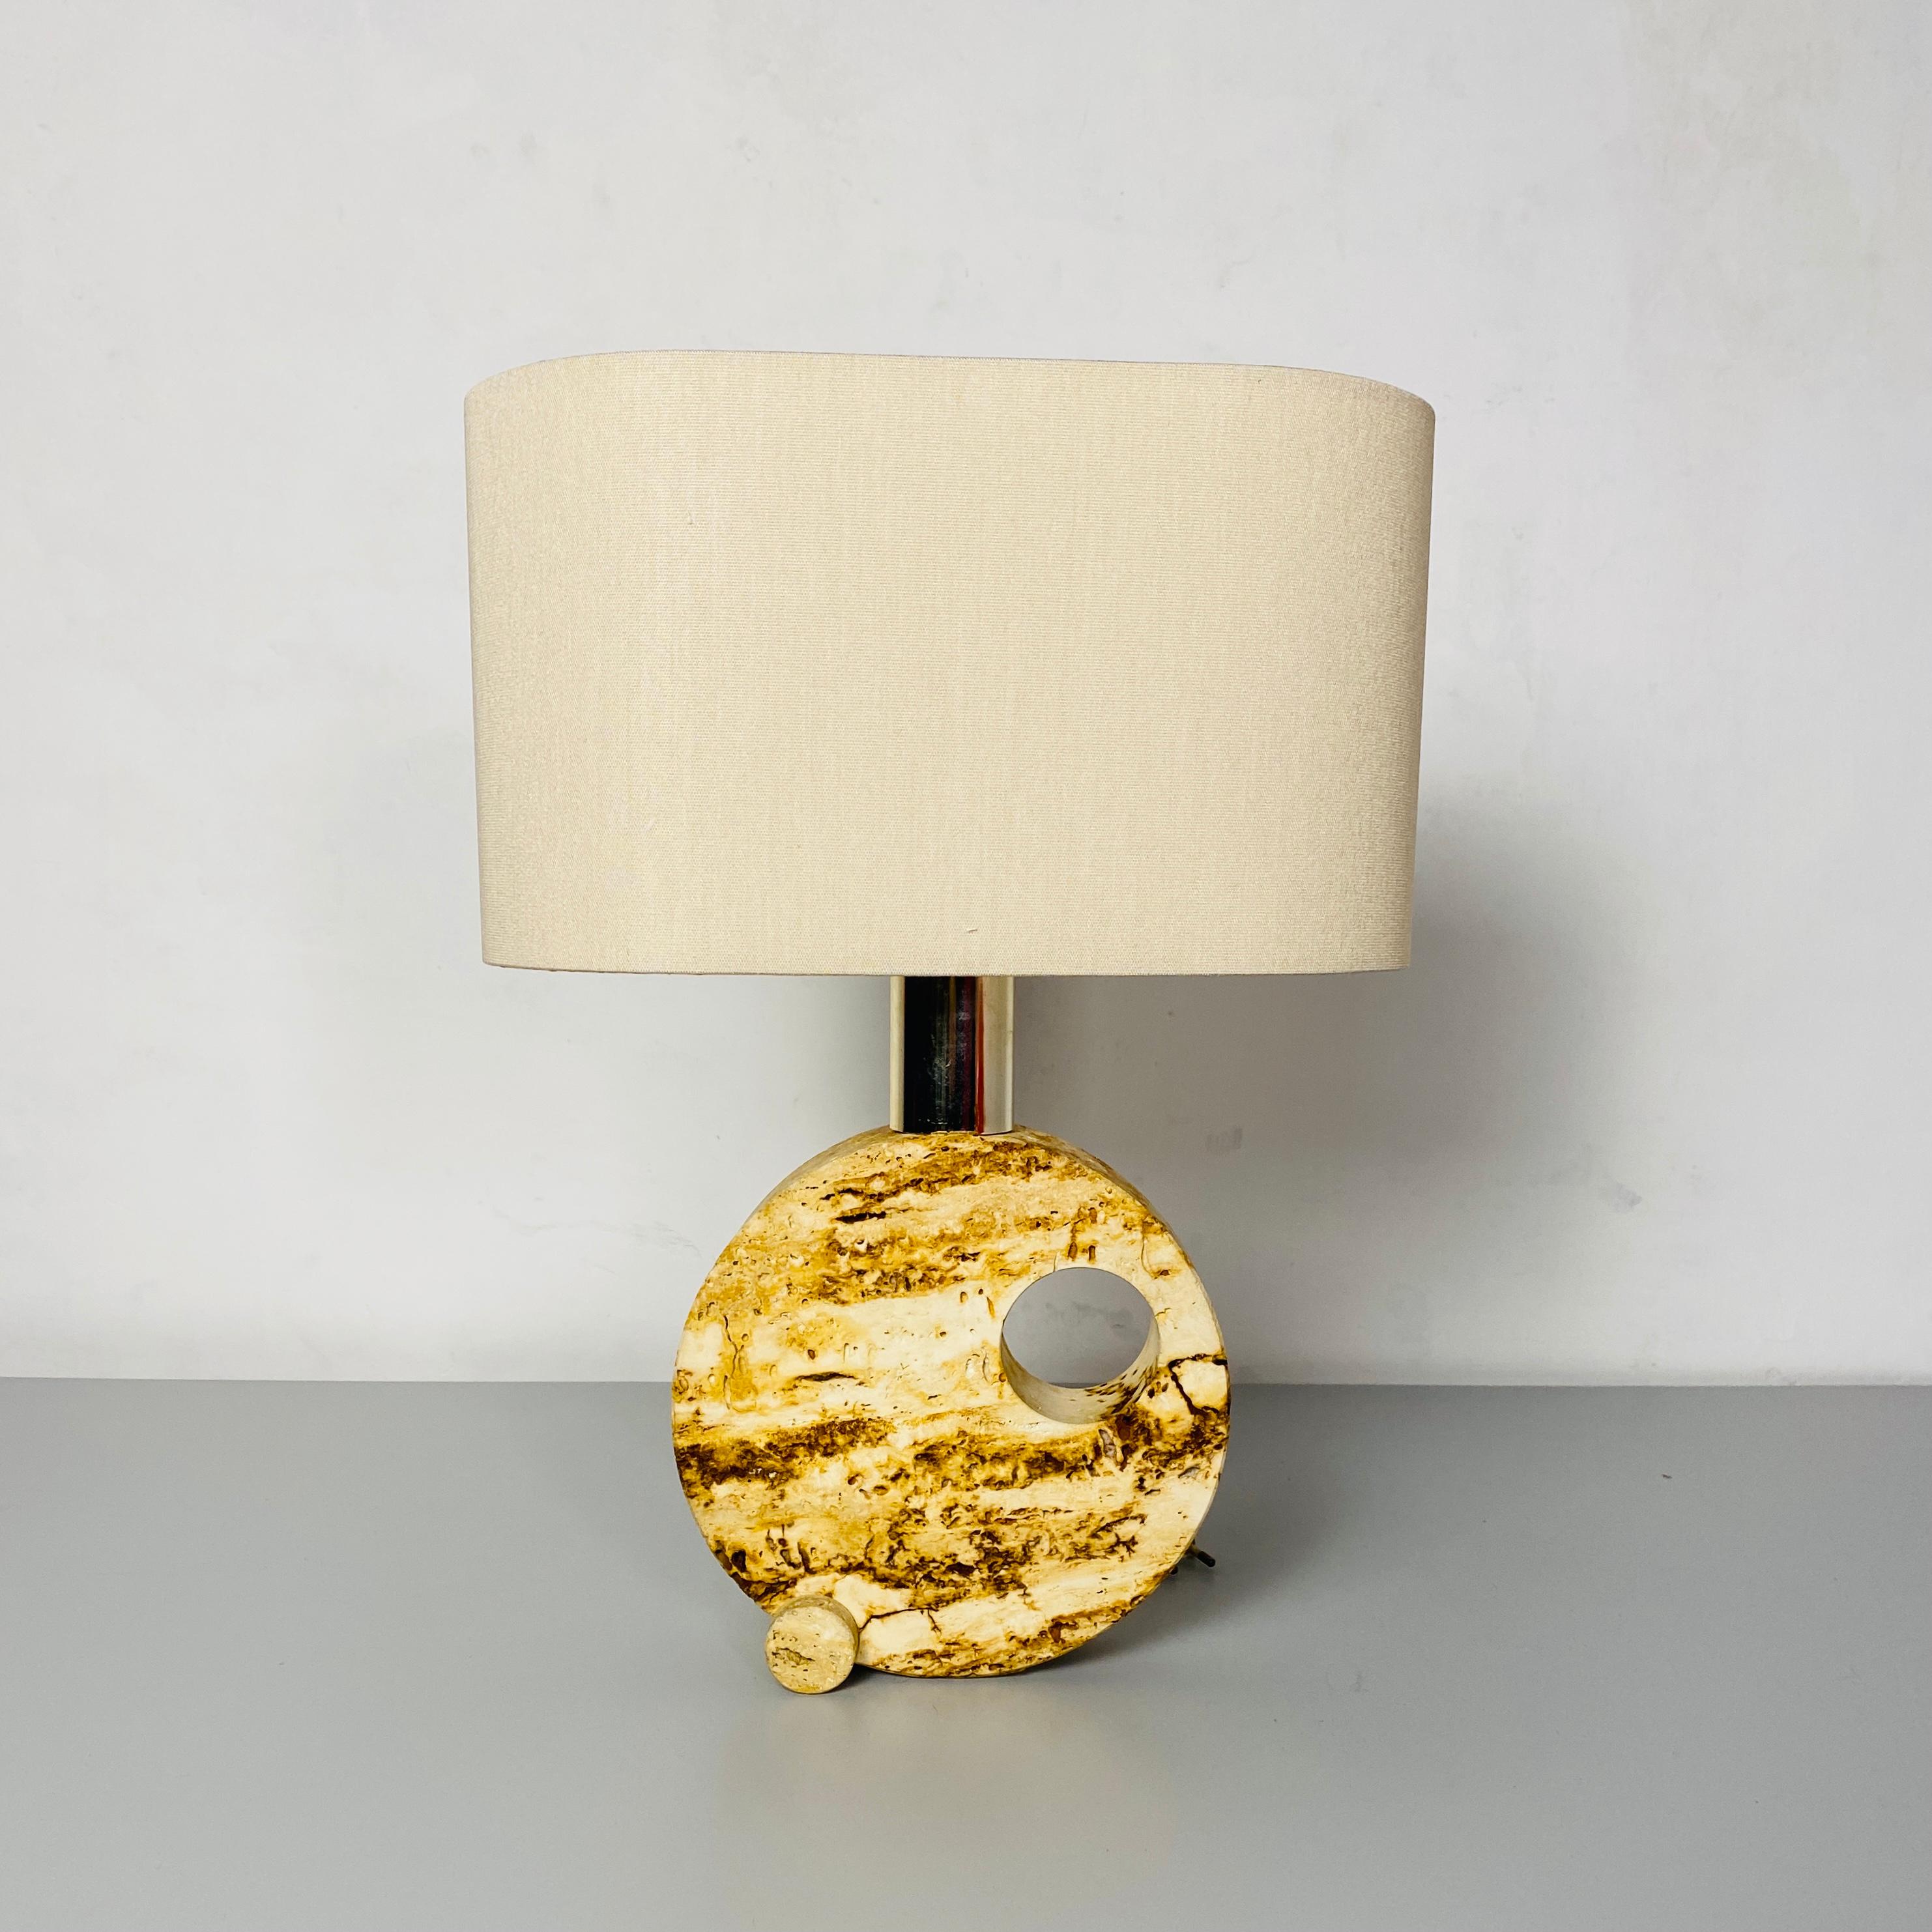 Italian Mid-Century Modern travertine table lamp with cotton lampshade, 1970s
Table lamp with circular base in perforated travertine, steel lamp holder and new cotton lampshade.
The base is in the Fratelli Mannelli style.

Measures: 31x17x43h cm.